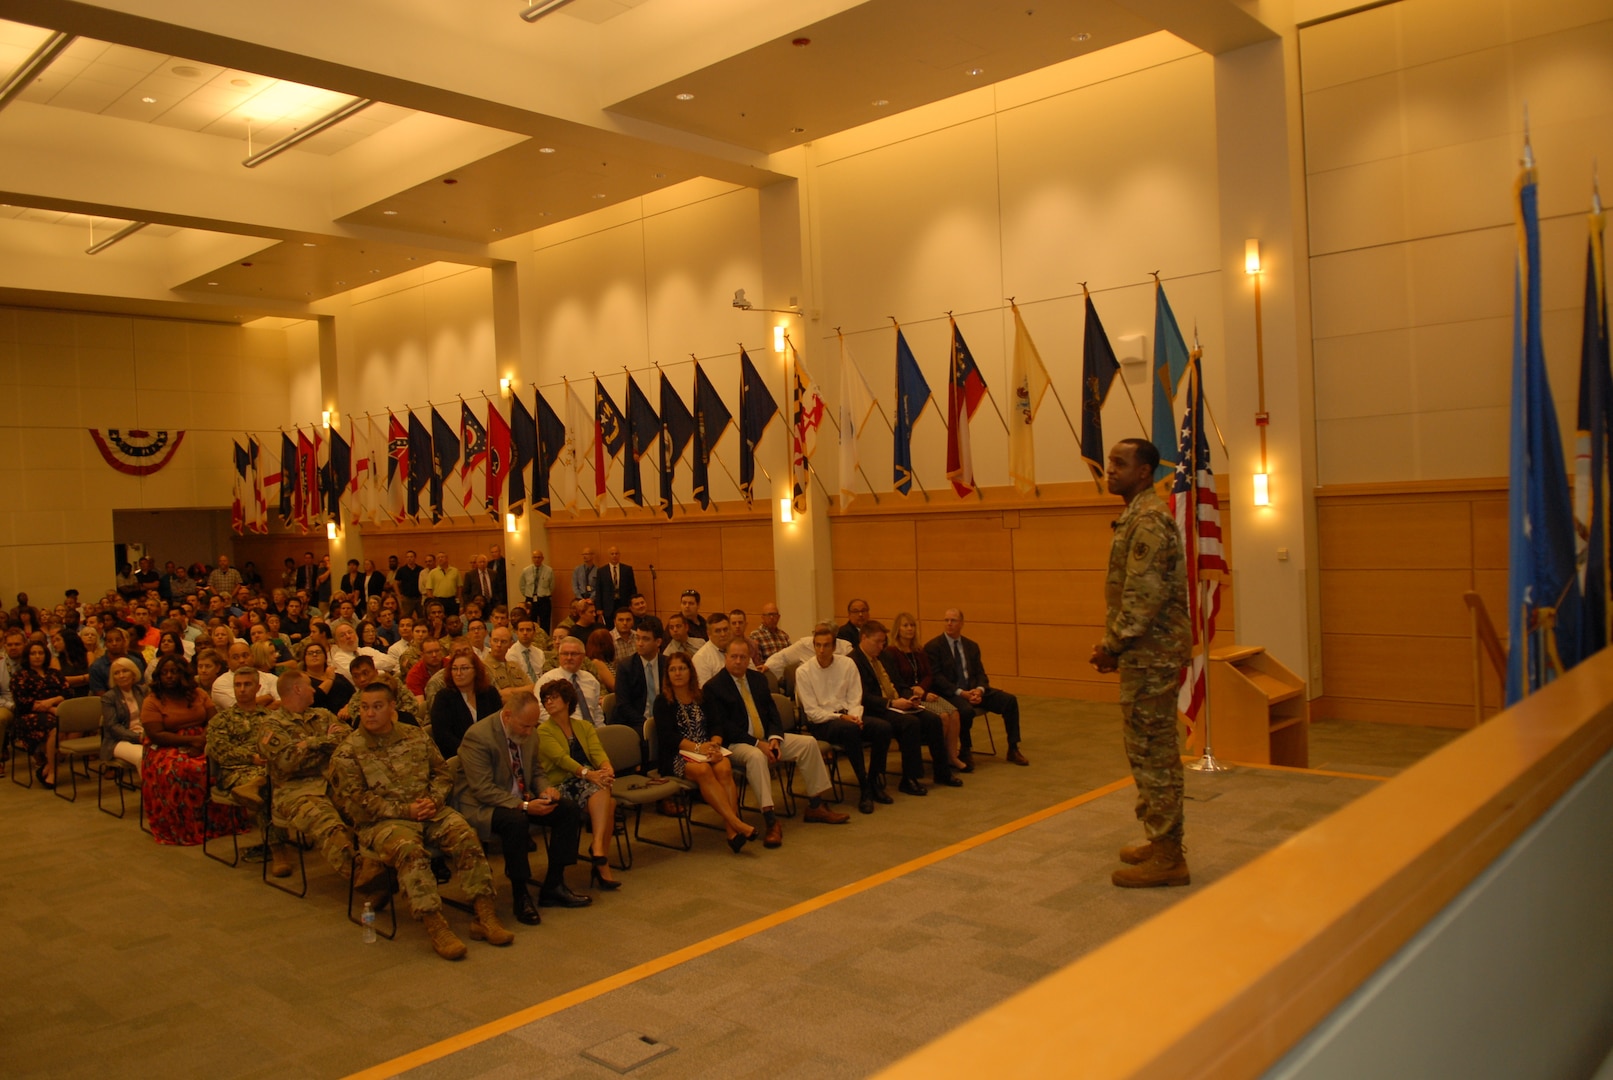 DLA Troop Support Commander Army Brig. Gen. Gavin Lawrence addresses the workforce at a town hall event Oct. 2, 2019 in Philadelphia. Lawrence discussed the accomplishments of the past fiscal year and changes and expectations of the next. Photo by Ed Maldonado